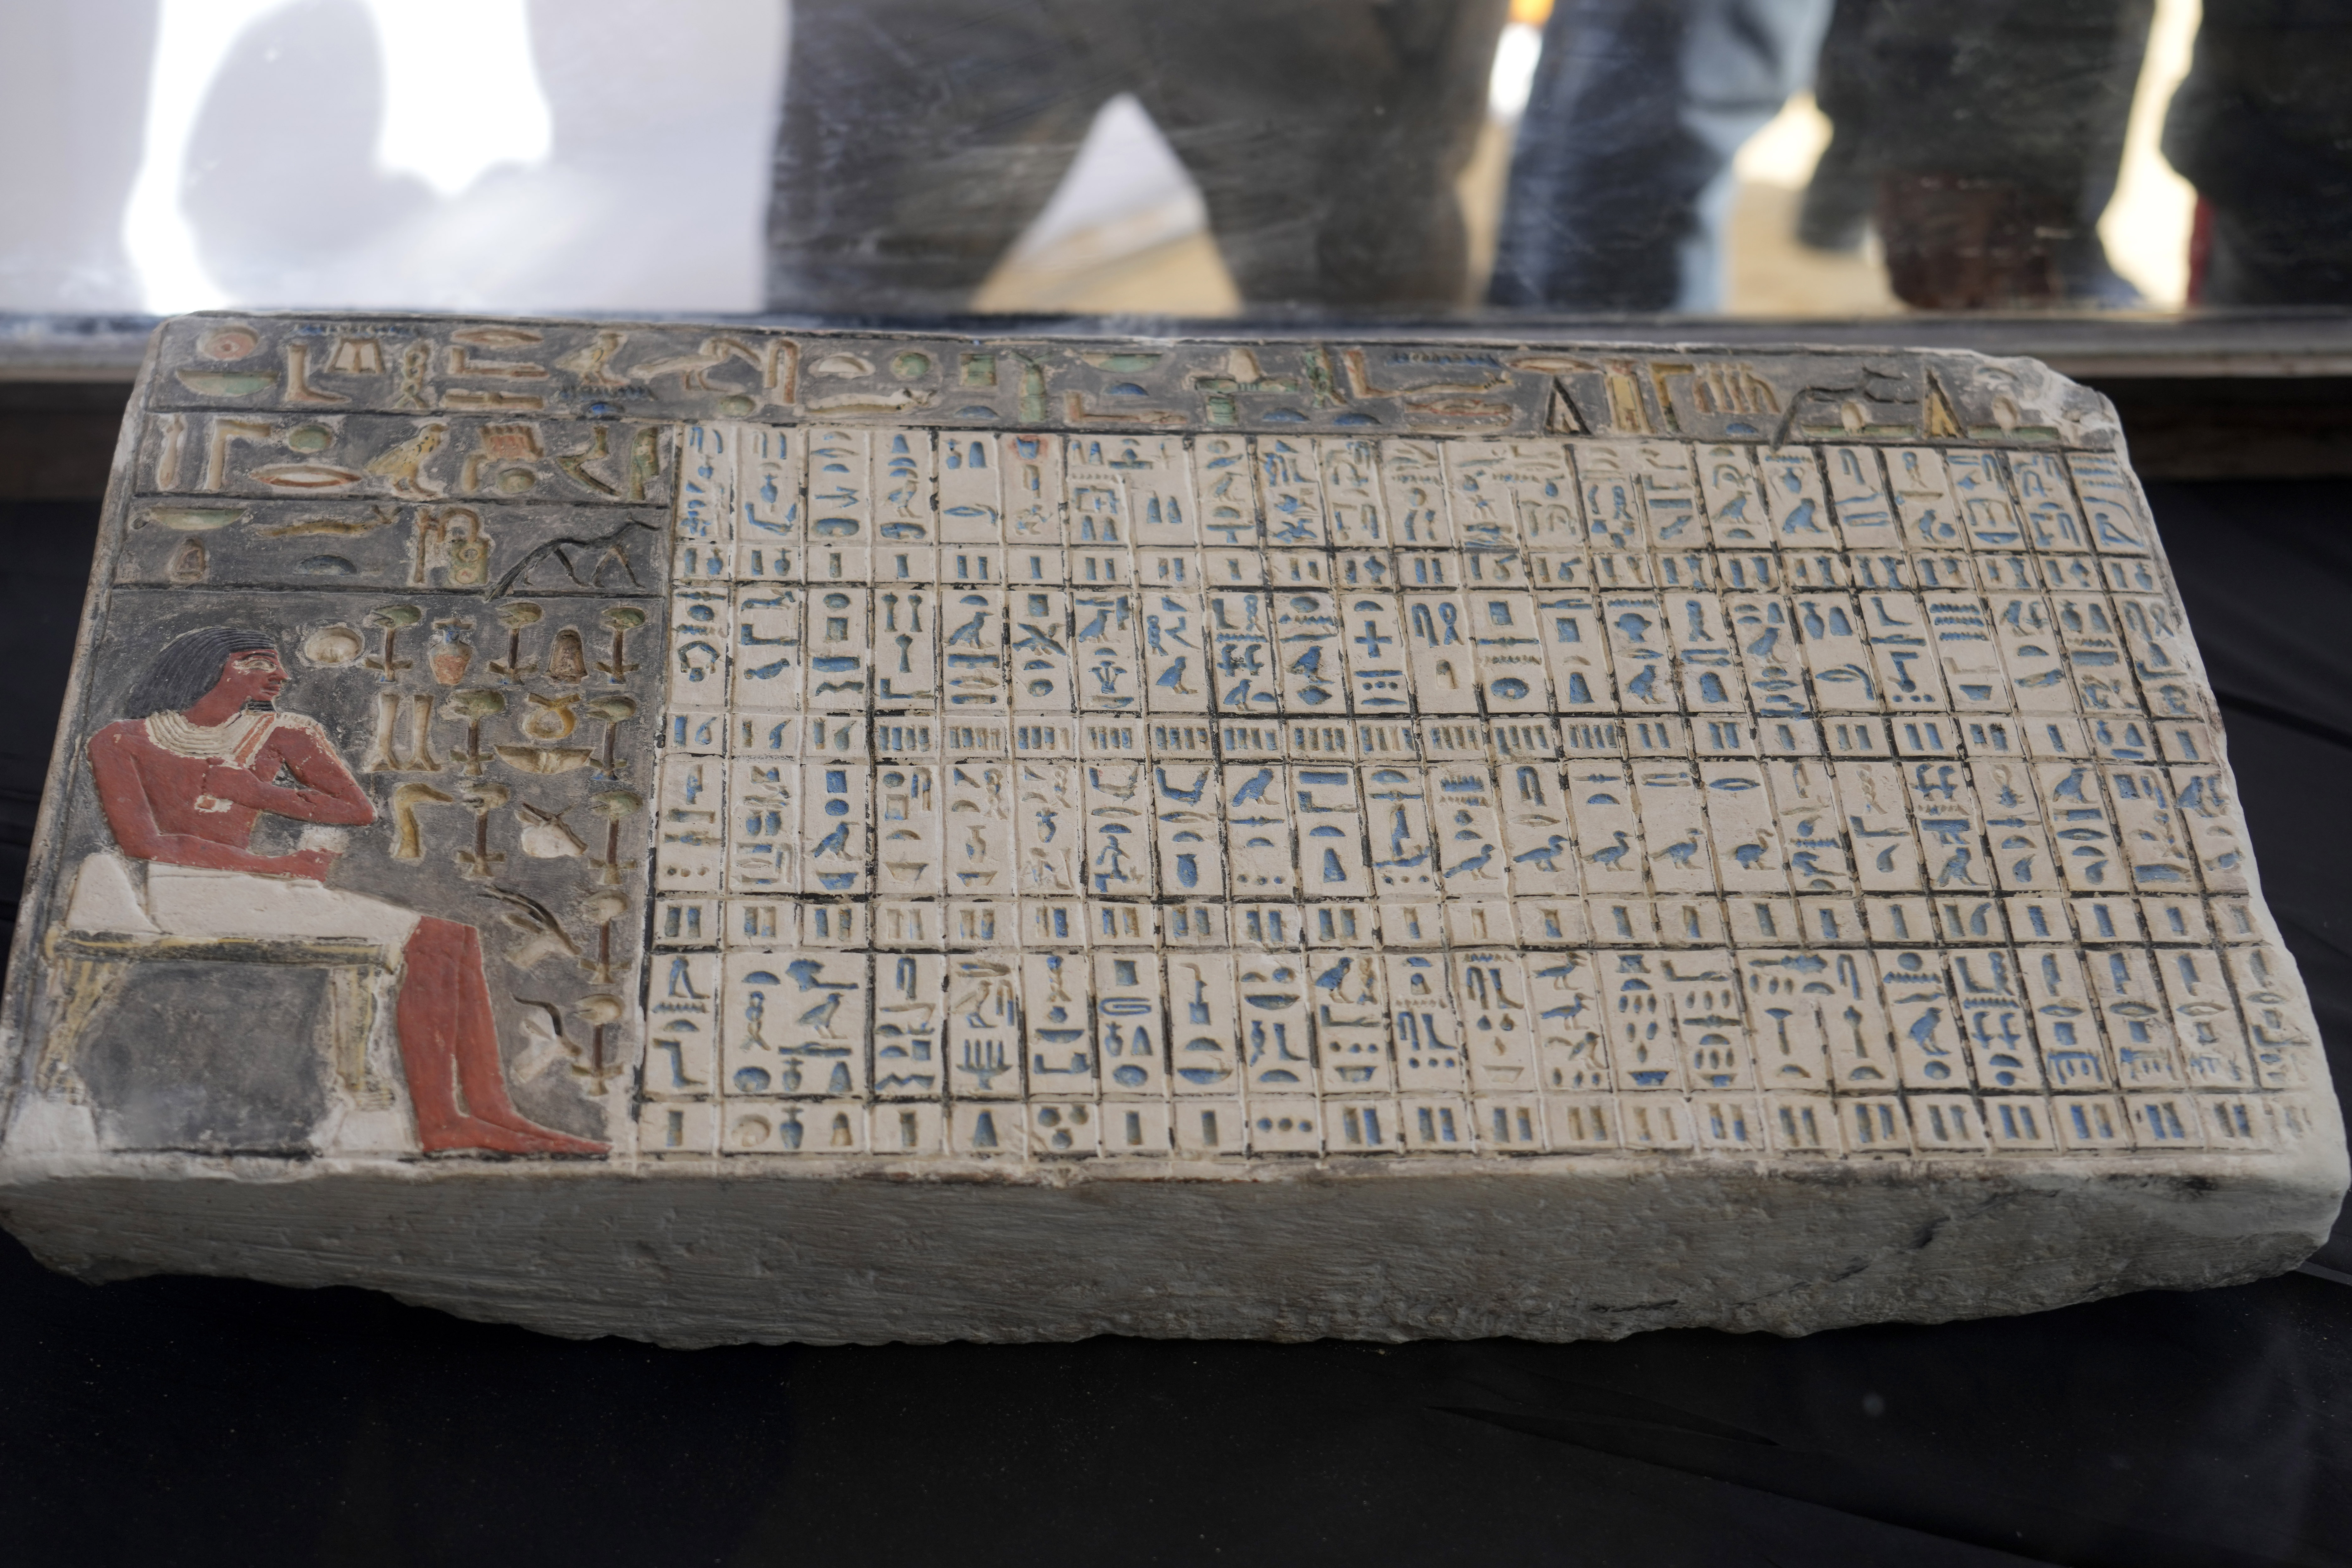 One of the tombs discovered belonged to a fifth dynasty priest known as Khnumdjedef (AP Photo/Amr Nabil)